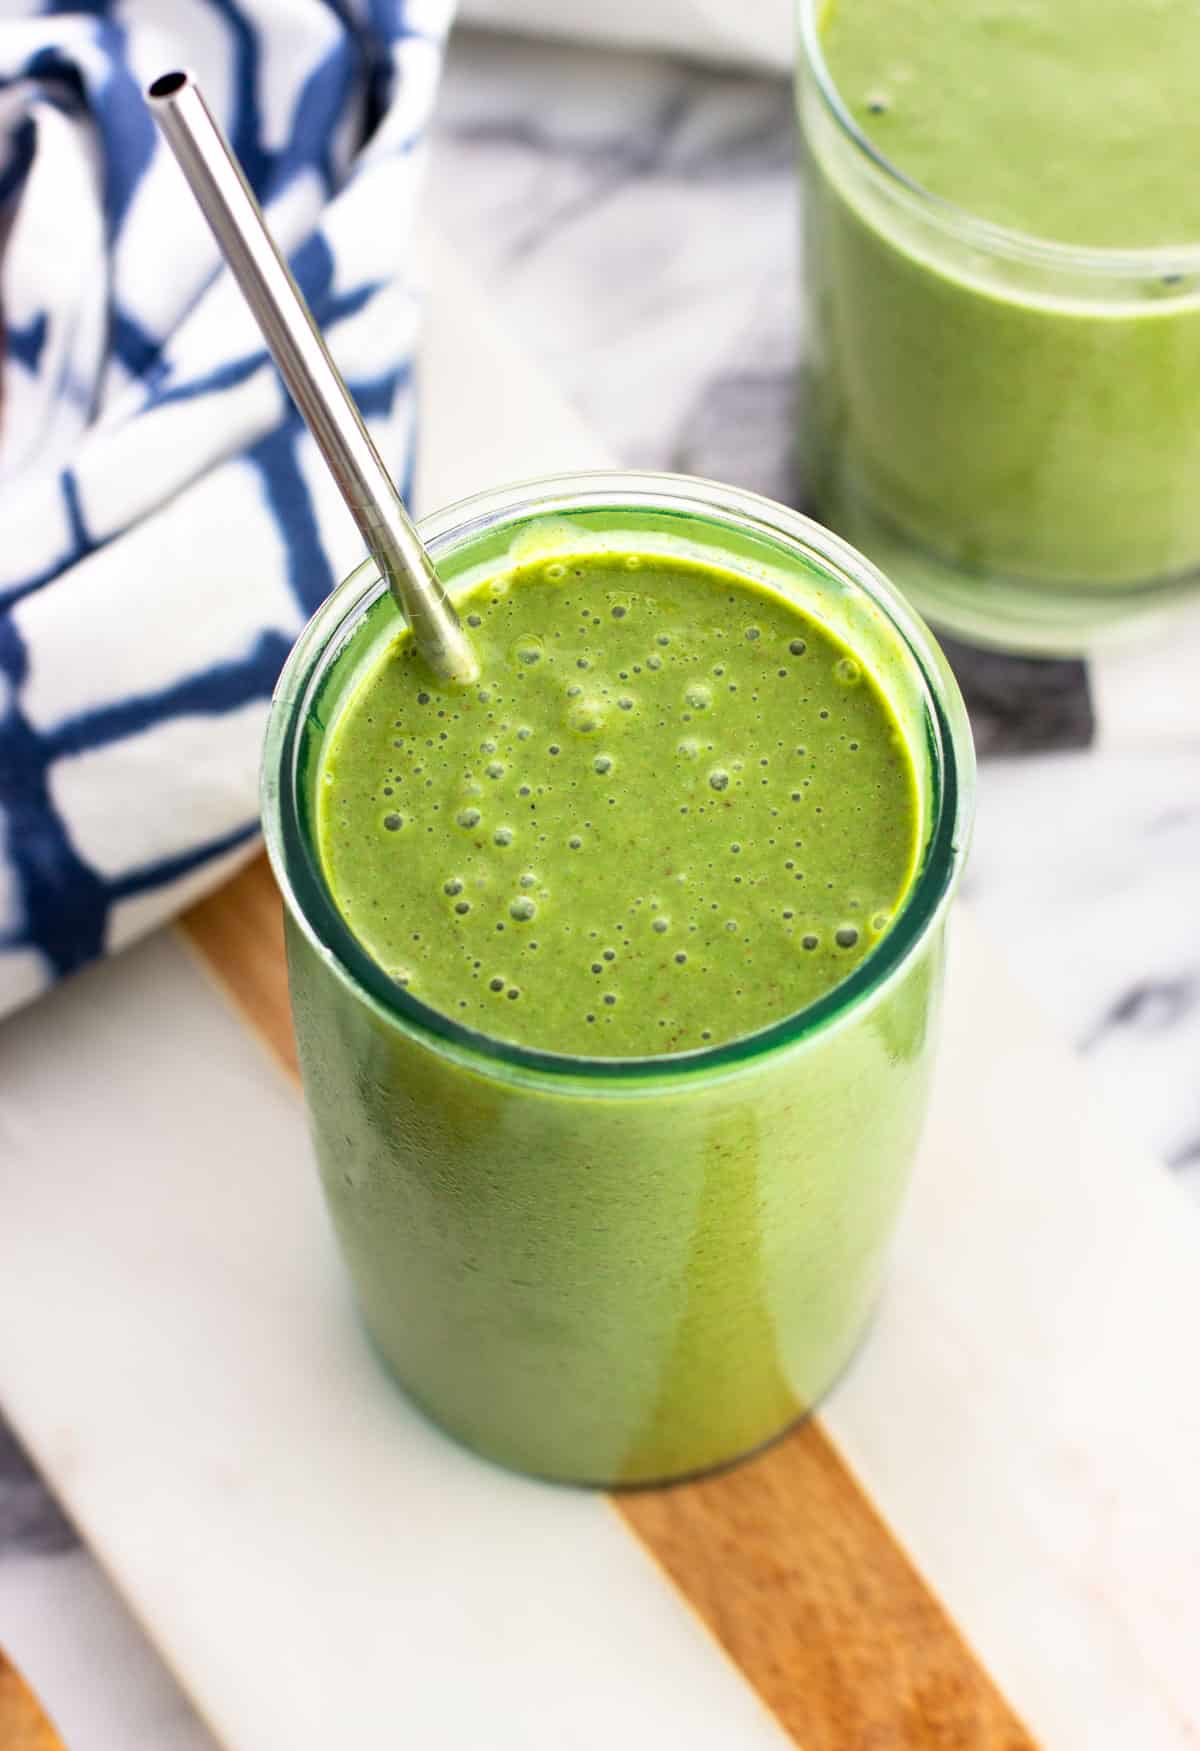 A green smoothie in a tall glass with a metal straw.